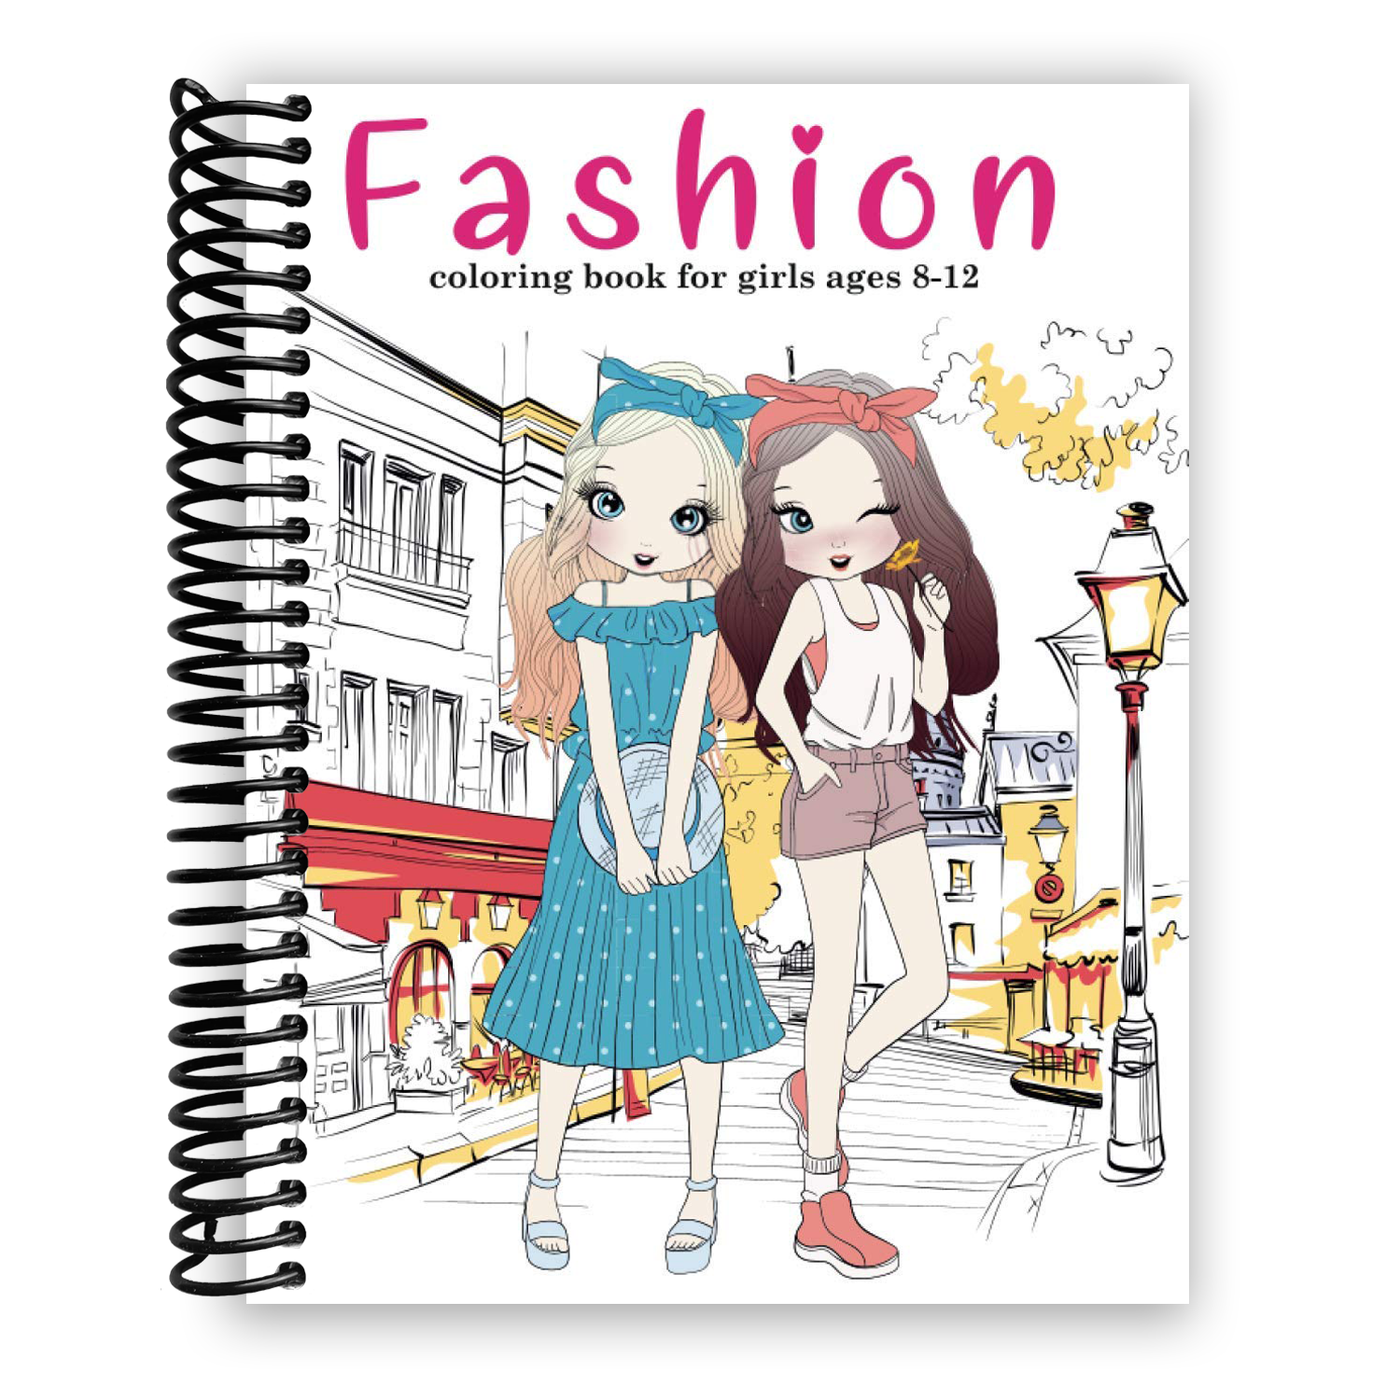 Fashion Coloring Book For Girls Ages 8-12: Fun and Stylish Fashion and Beauty Coloring Pages for Girls, Kids, Teens and Women with 55+ Fabulous Fashion Style (Spiral Bound)